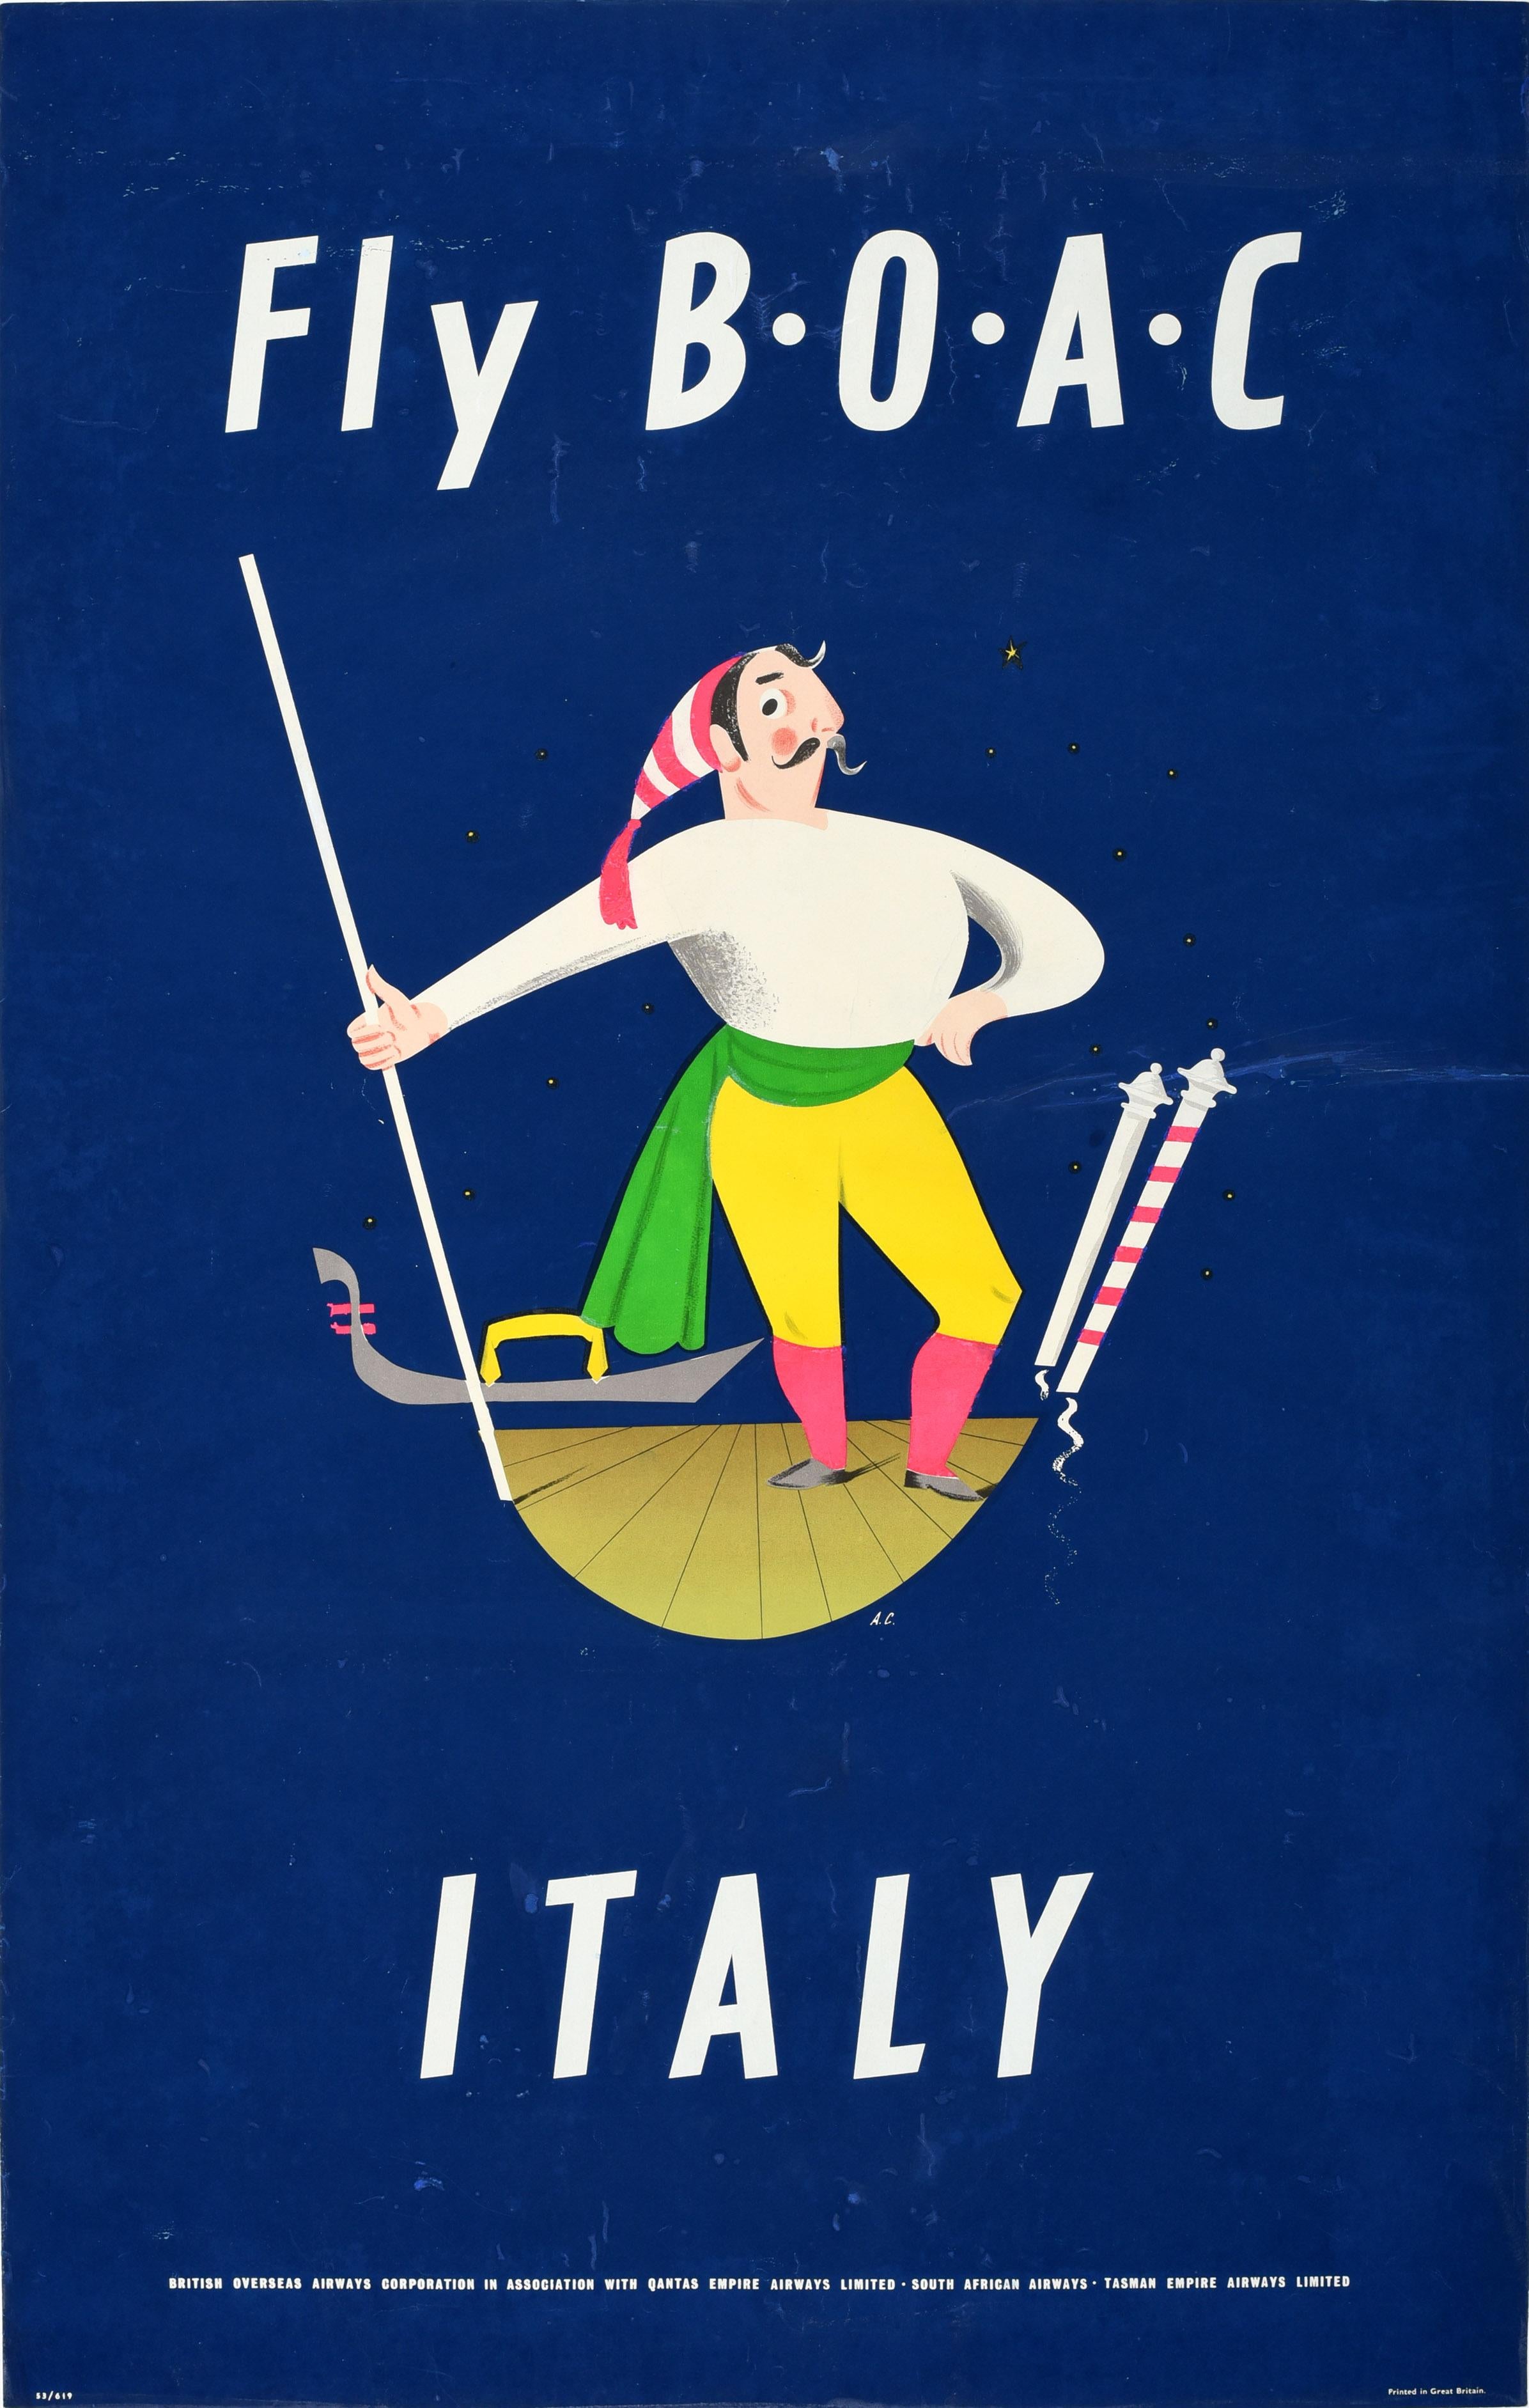 Original vintage silkscreen travel poster for Italy Fly BOAC British Overseas Airways Corporation in Association with Qantas Empire Airways Limited South African Airways Tasman Empire Airways Limited featuring colourful artwork by the Italian artist